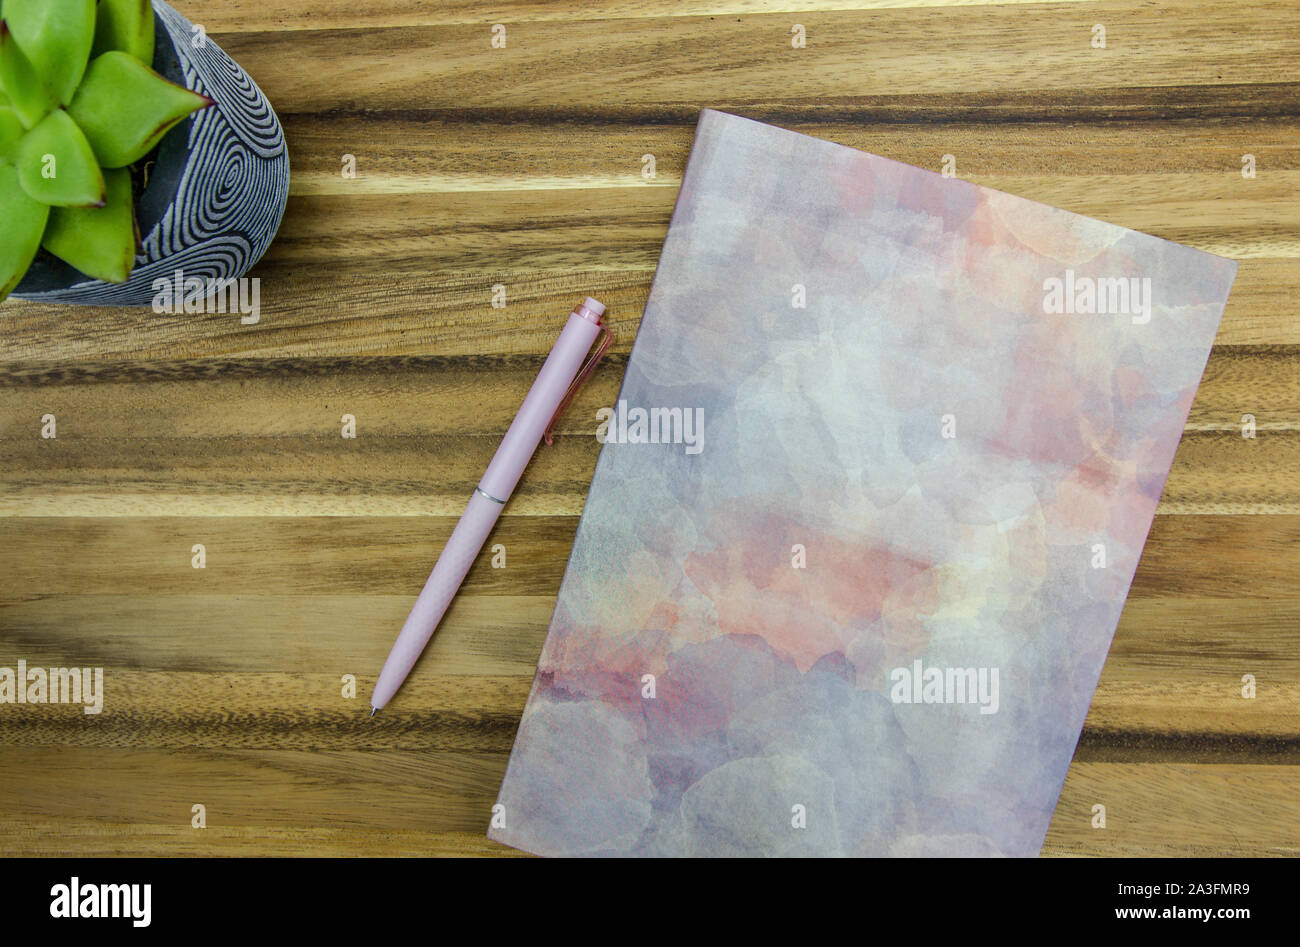 Top View of Stylish Notepad and Pen Next to Plant on Wooden Table Stock Photo